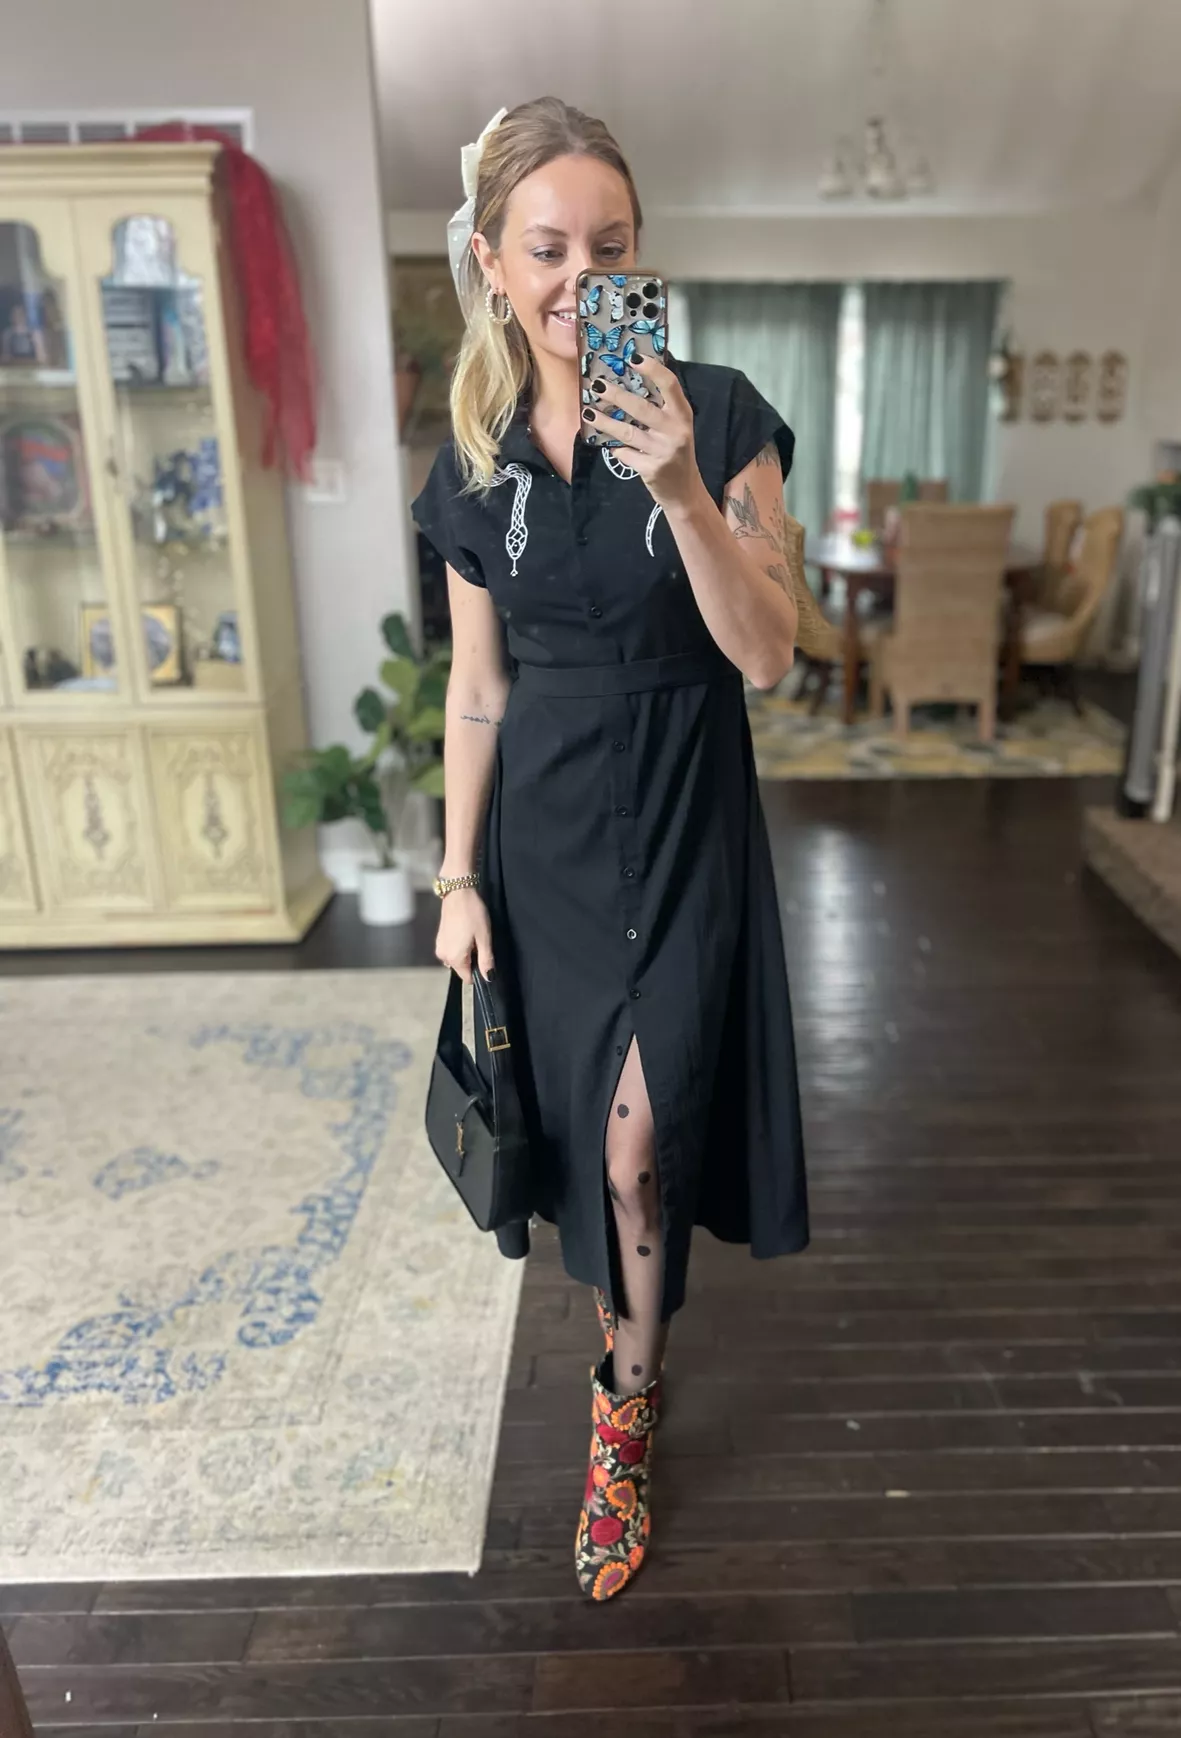 Black Leggings with Shirtdress Outfits (3 ideas & outfits)